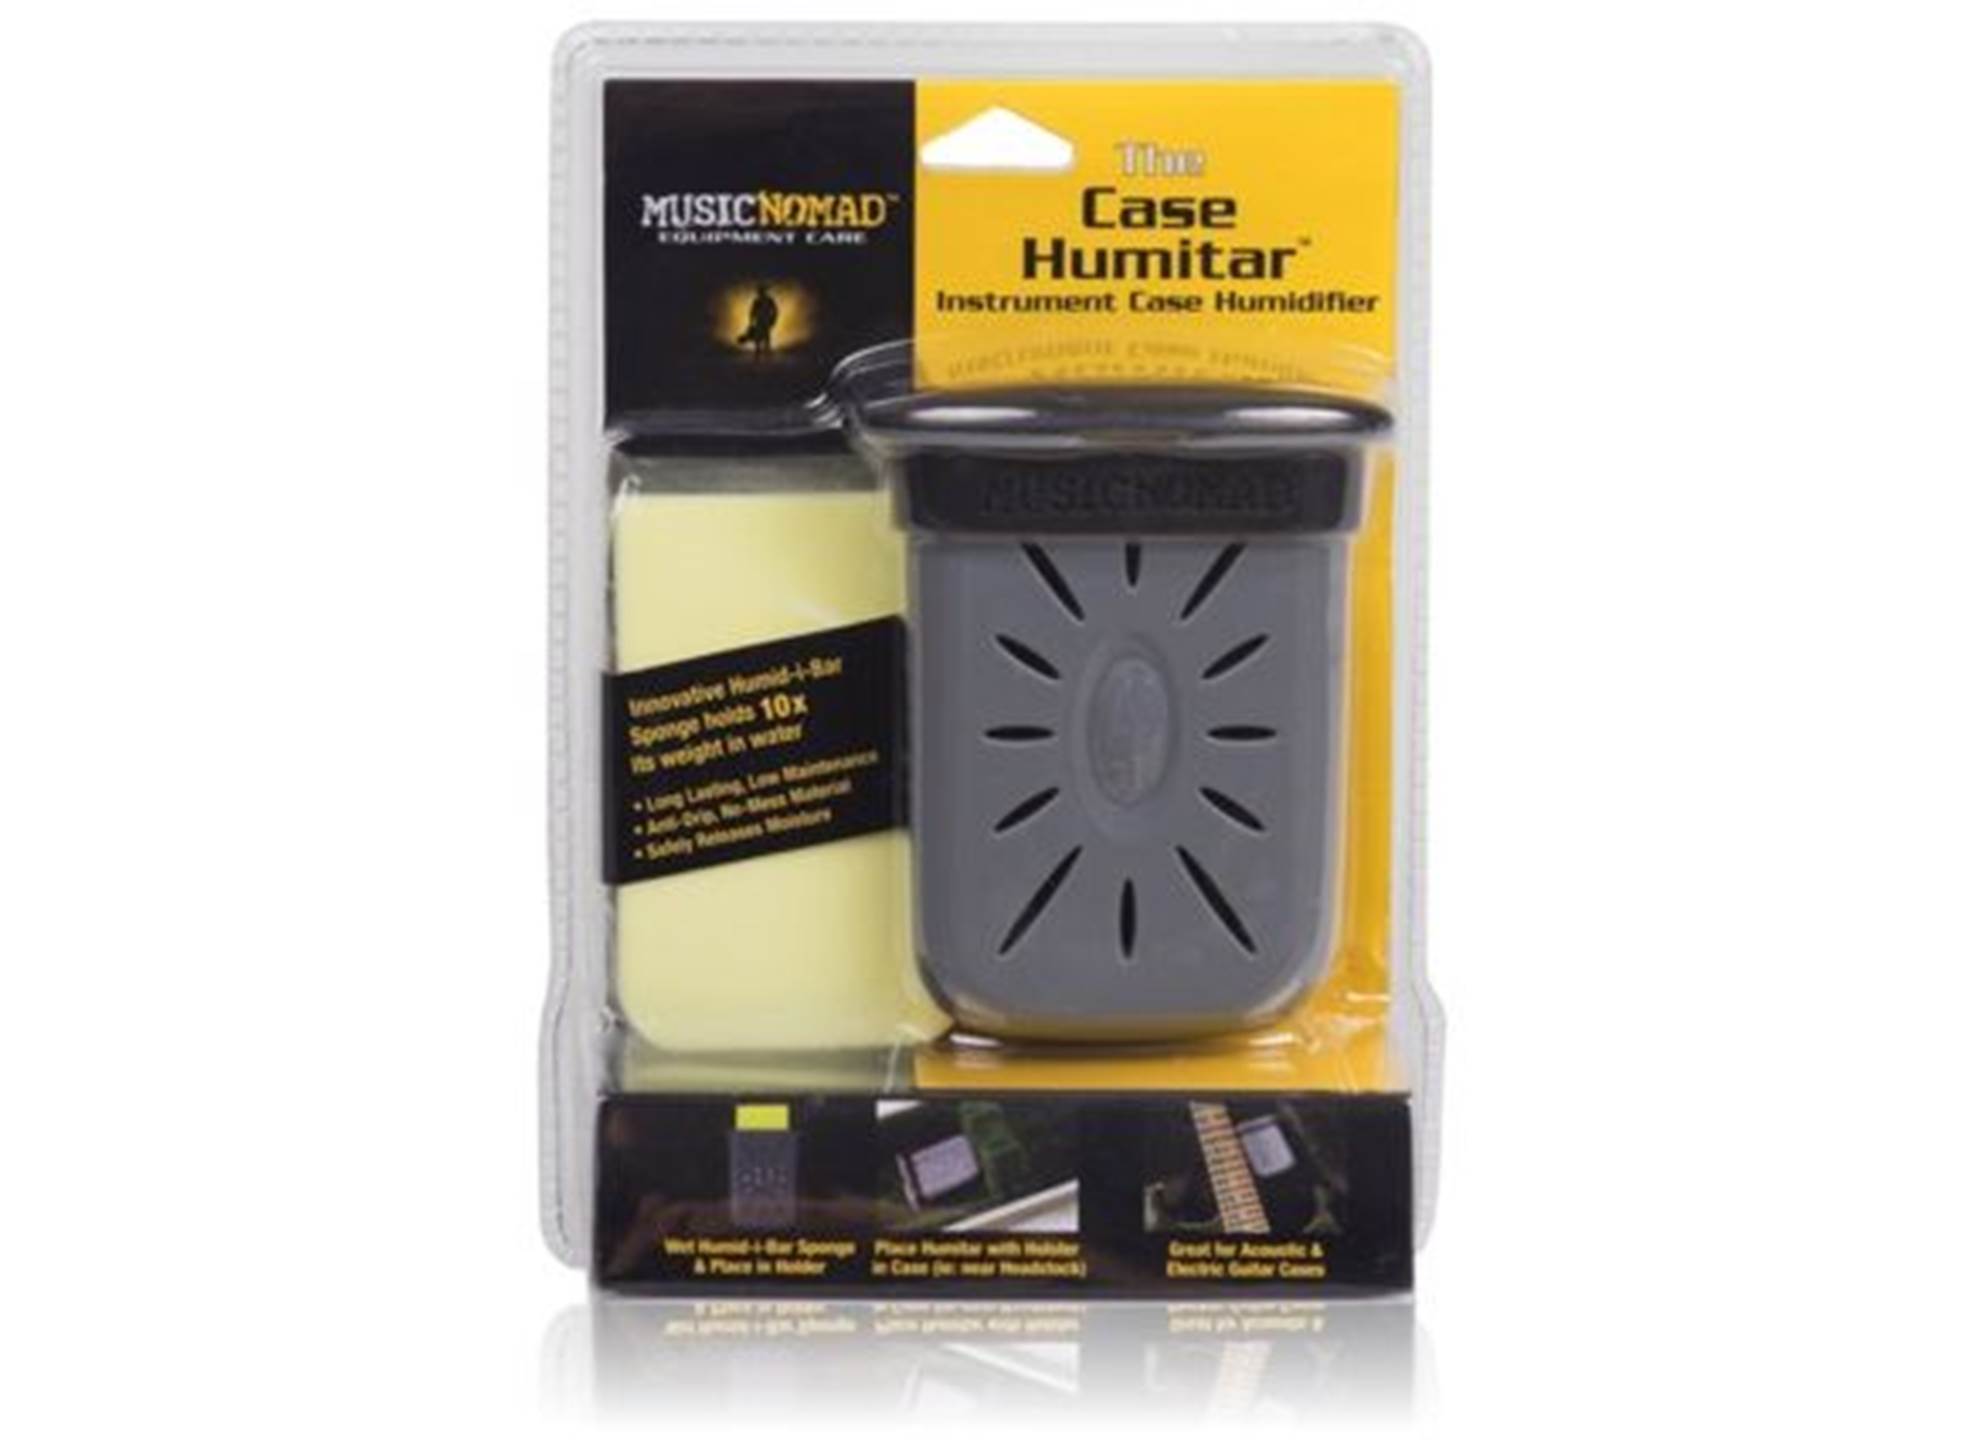 The Humitar Instrument Case Humidifier w/ Case Holster